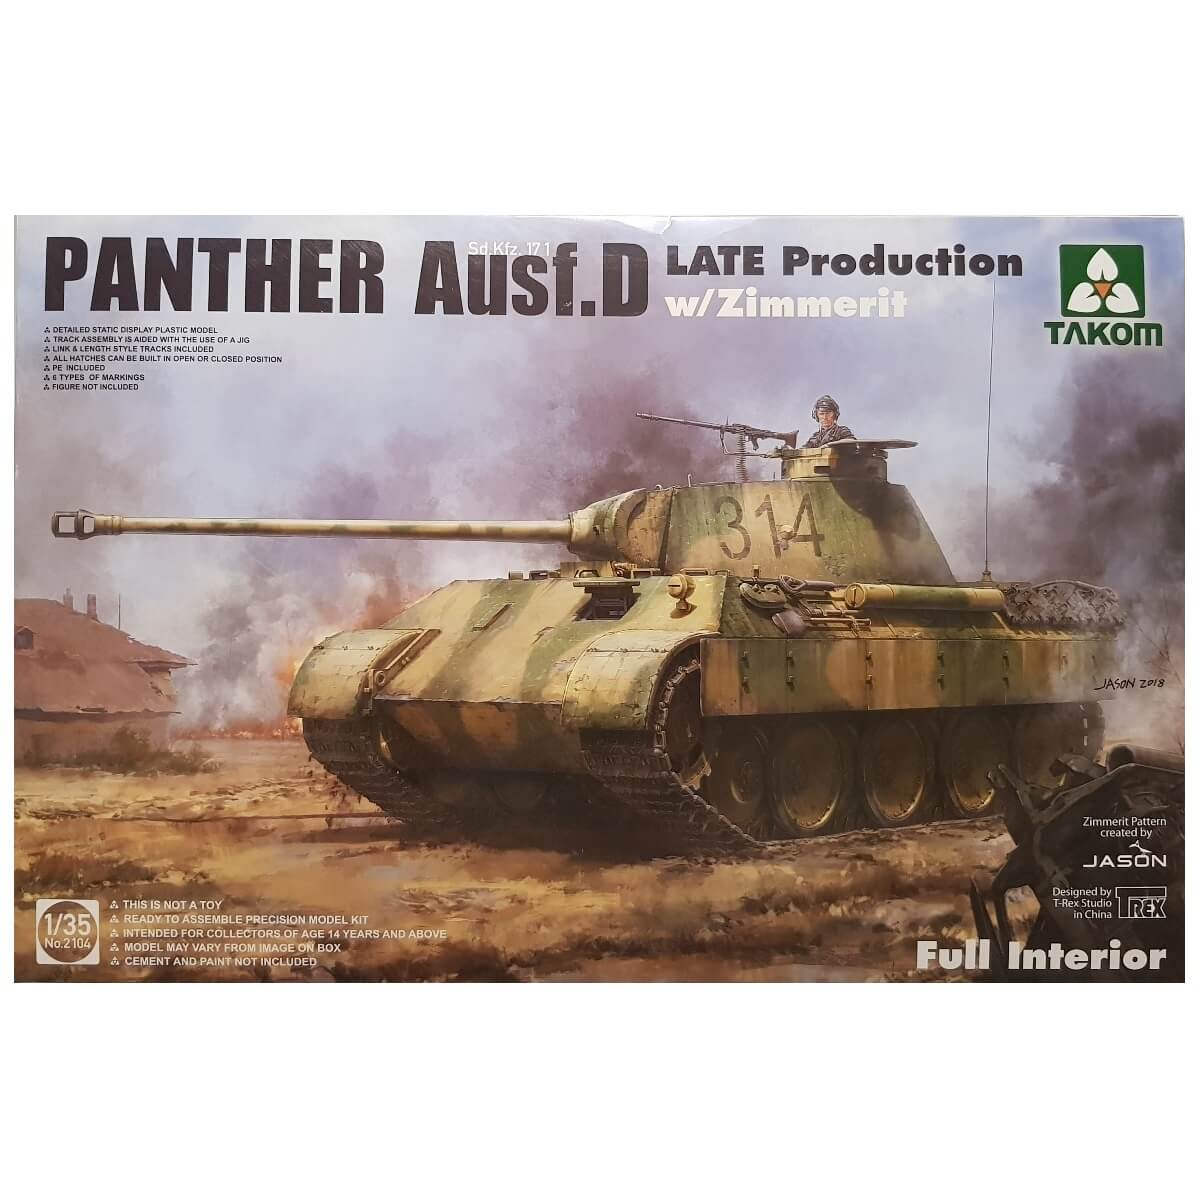 1:35 Sd.Kfz. 171 Panther Ausf. D Late Production with Zimmerit and Full Interior - TAKOM